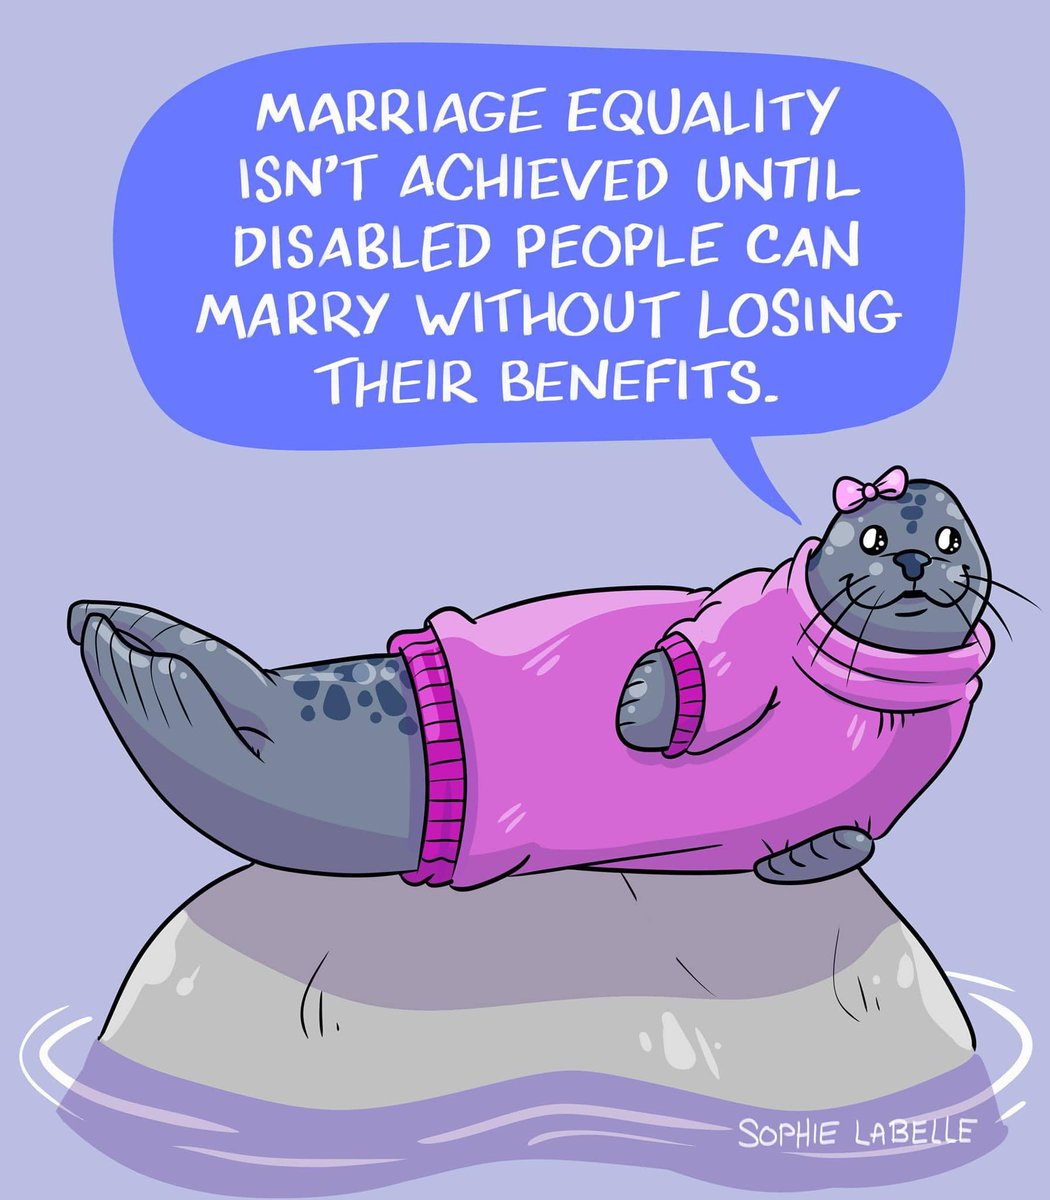 'Marriage equality isn't achieved until disabled people can marry without losing their benefits.'